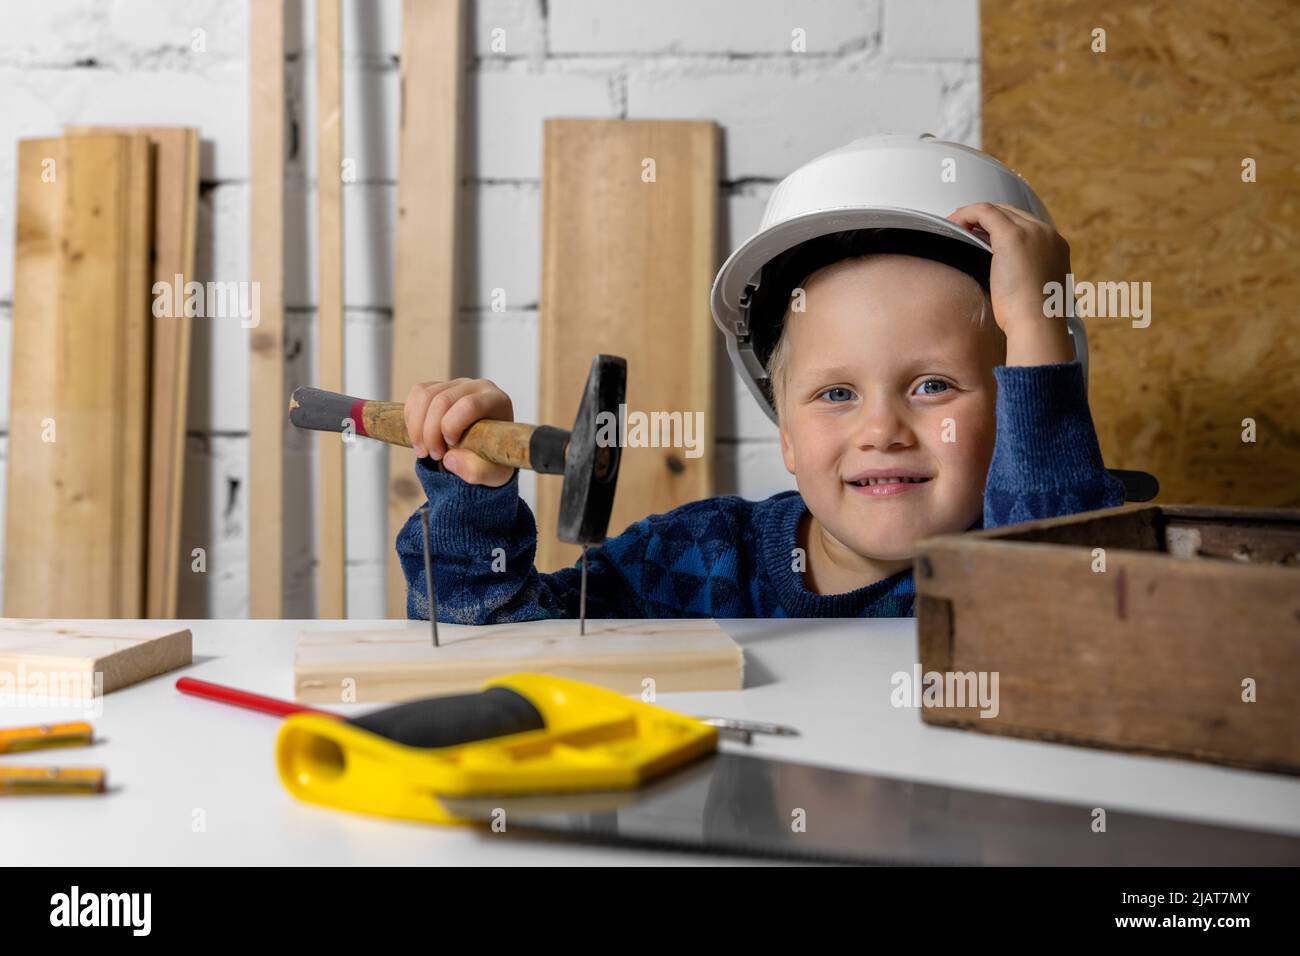 happy smiling little boy with helmet and hammer in hand at woodworking workshop Stock Photo